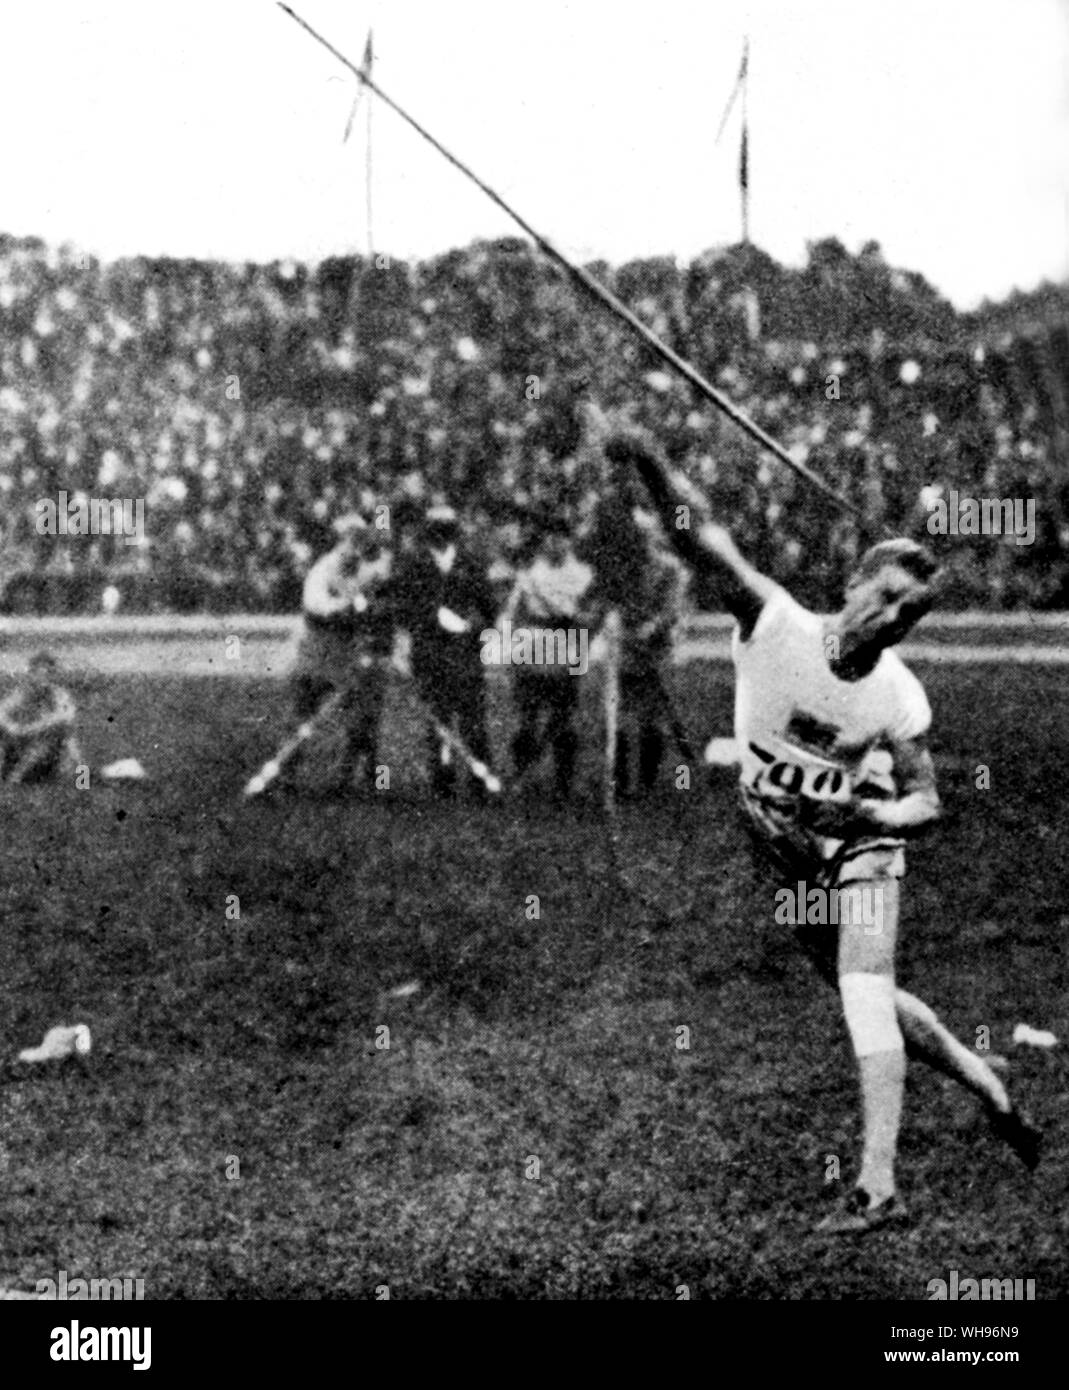 France, Paris Olympics, 1924: Gunnar Lindstrom (Sweden) won silver in the javelin competition with a thow of 60.92 metres.. Stock Photo